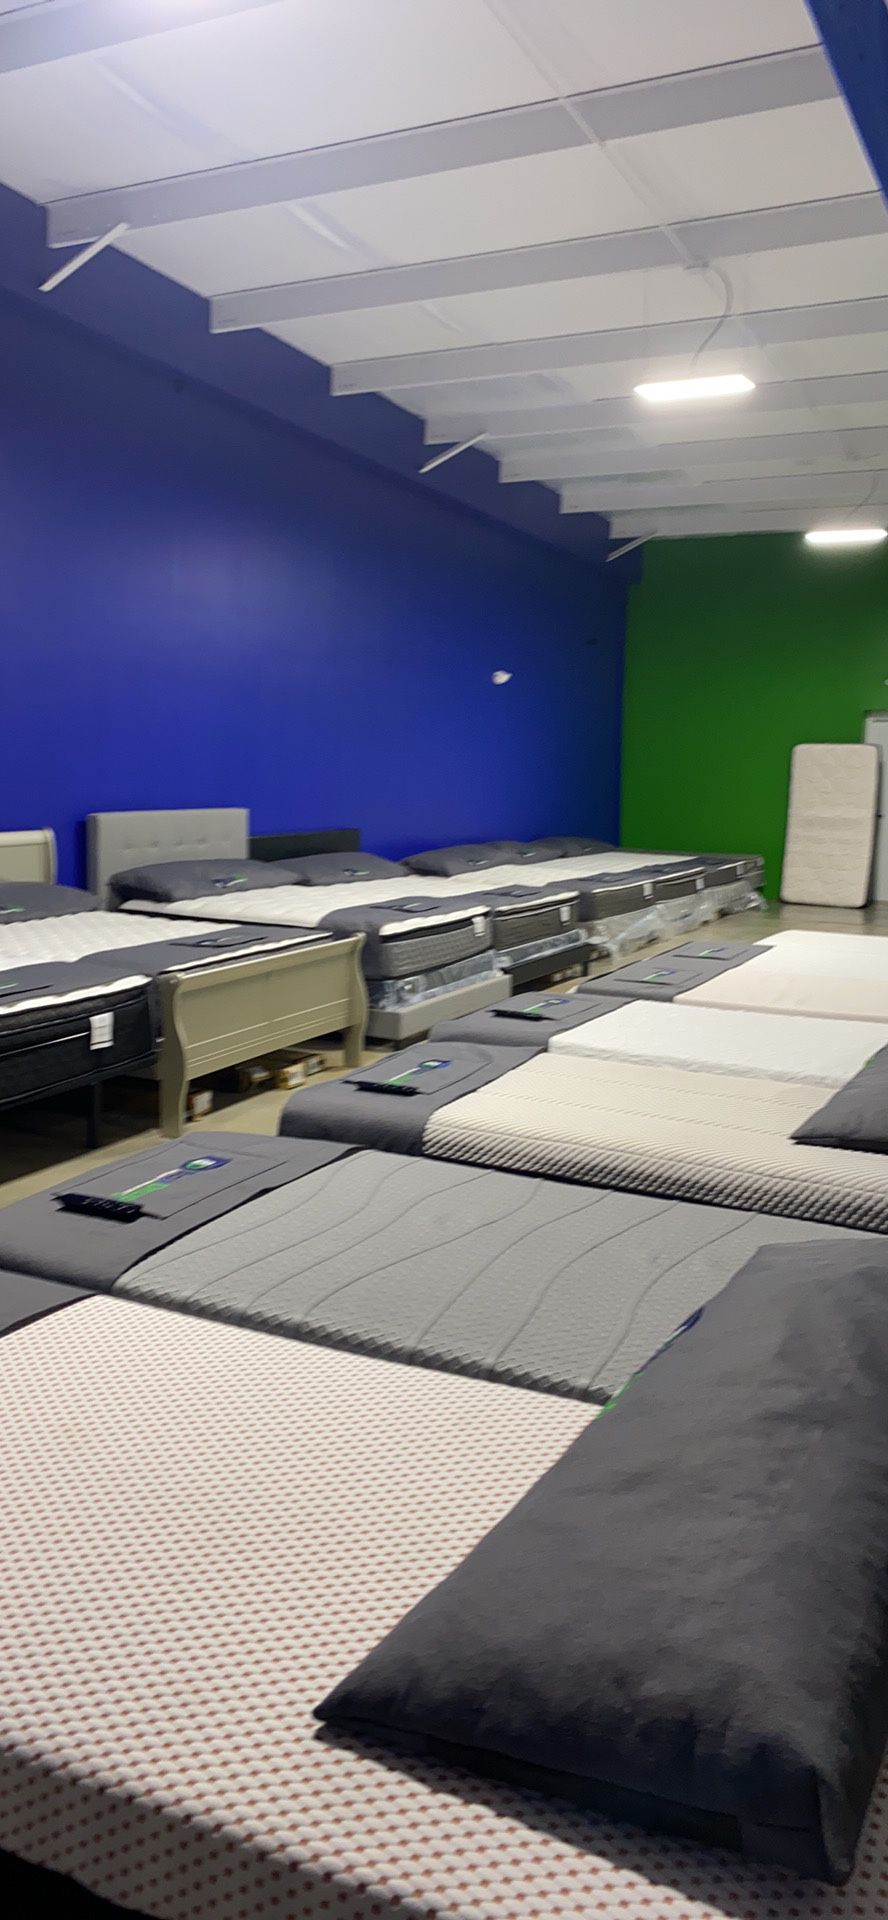 King Mattresses, Take Home For $40 Down!!